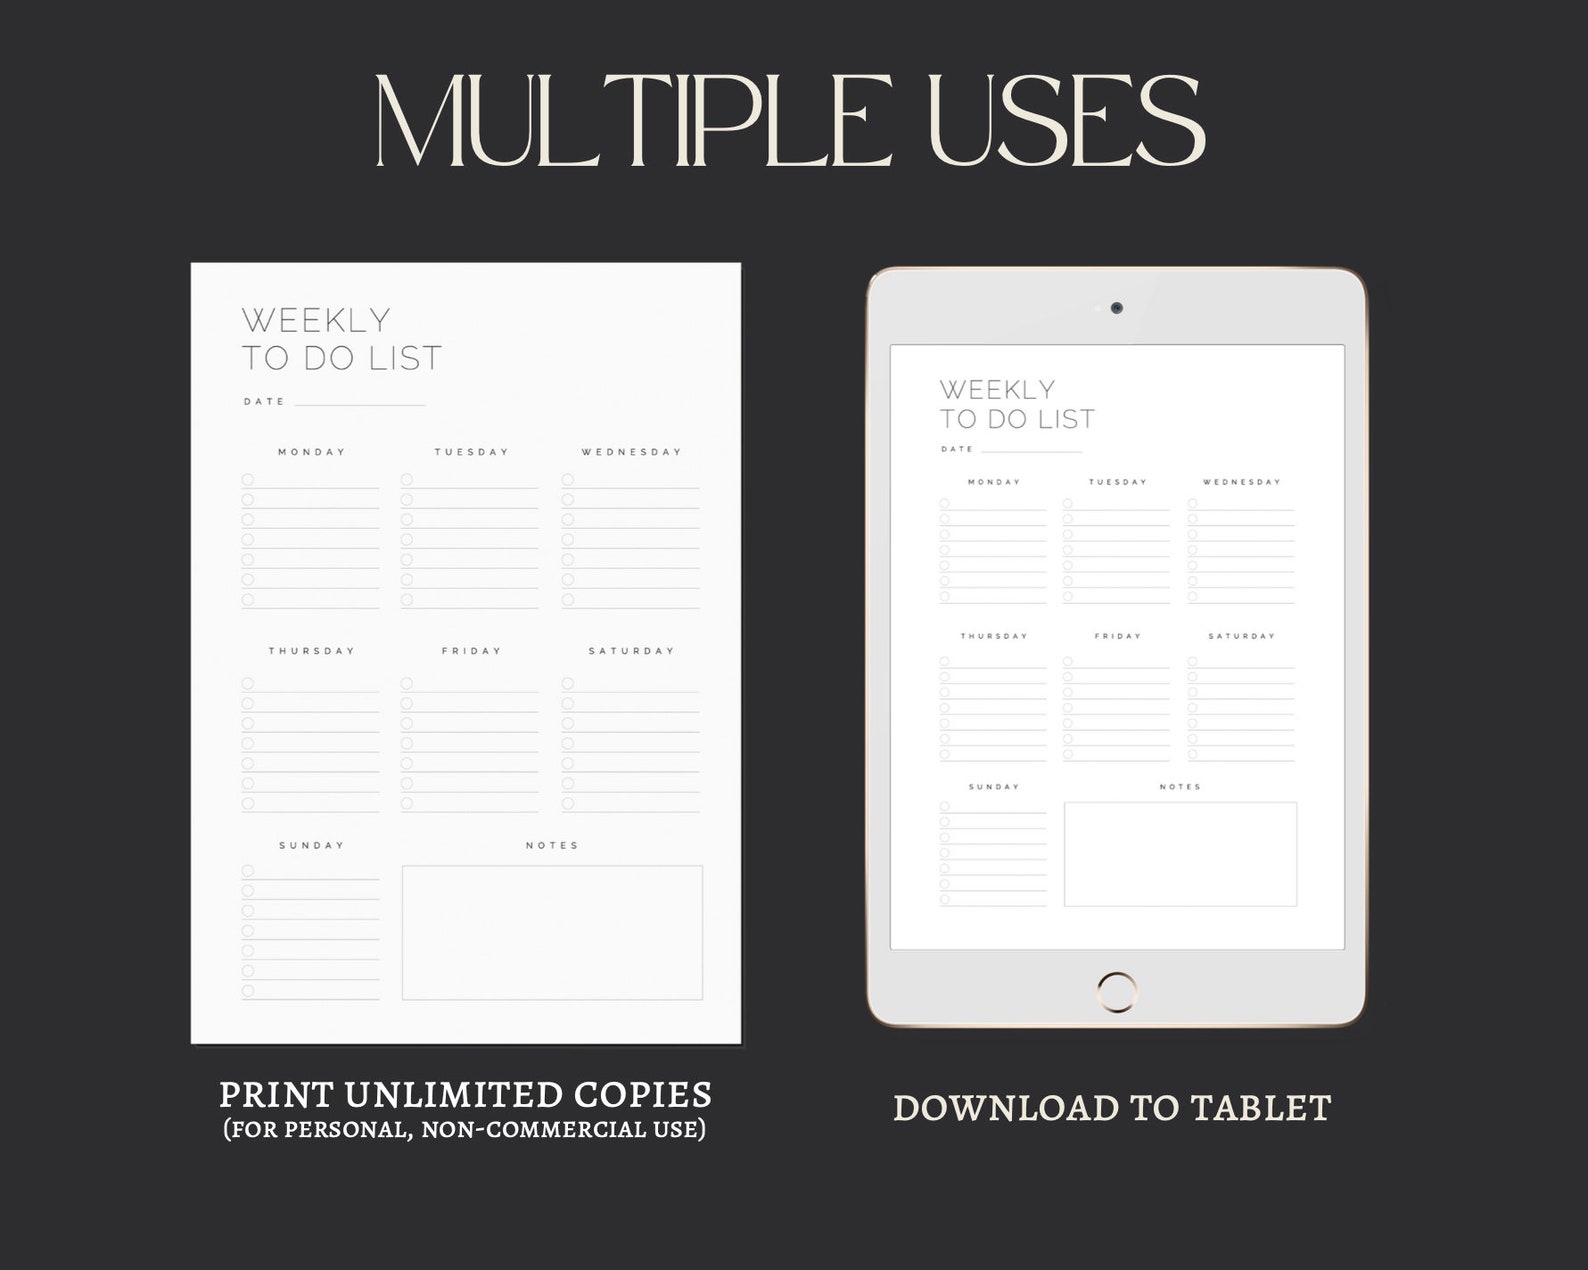 free-weekly-to-do-list-template-printable-daily-checklist